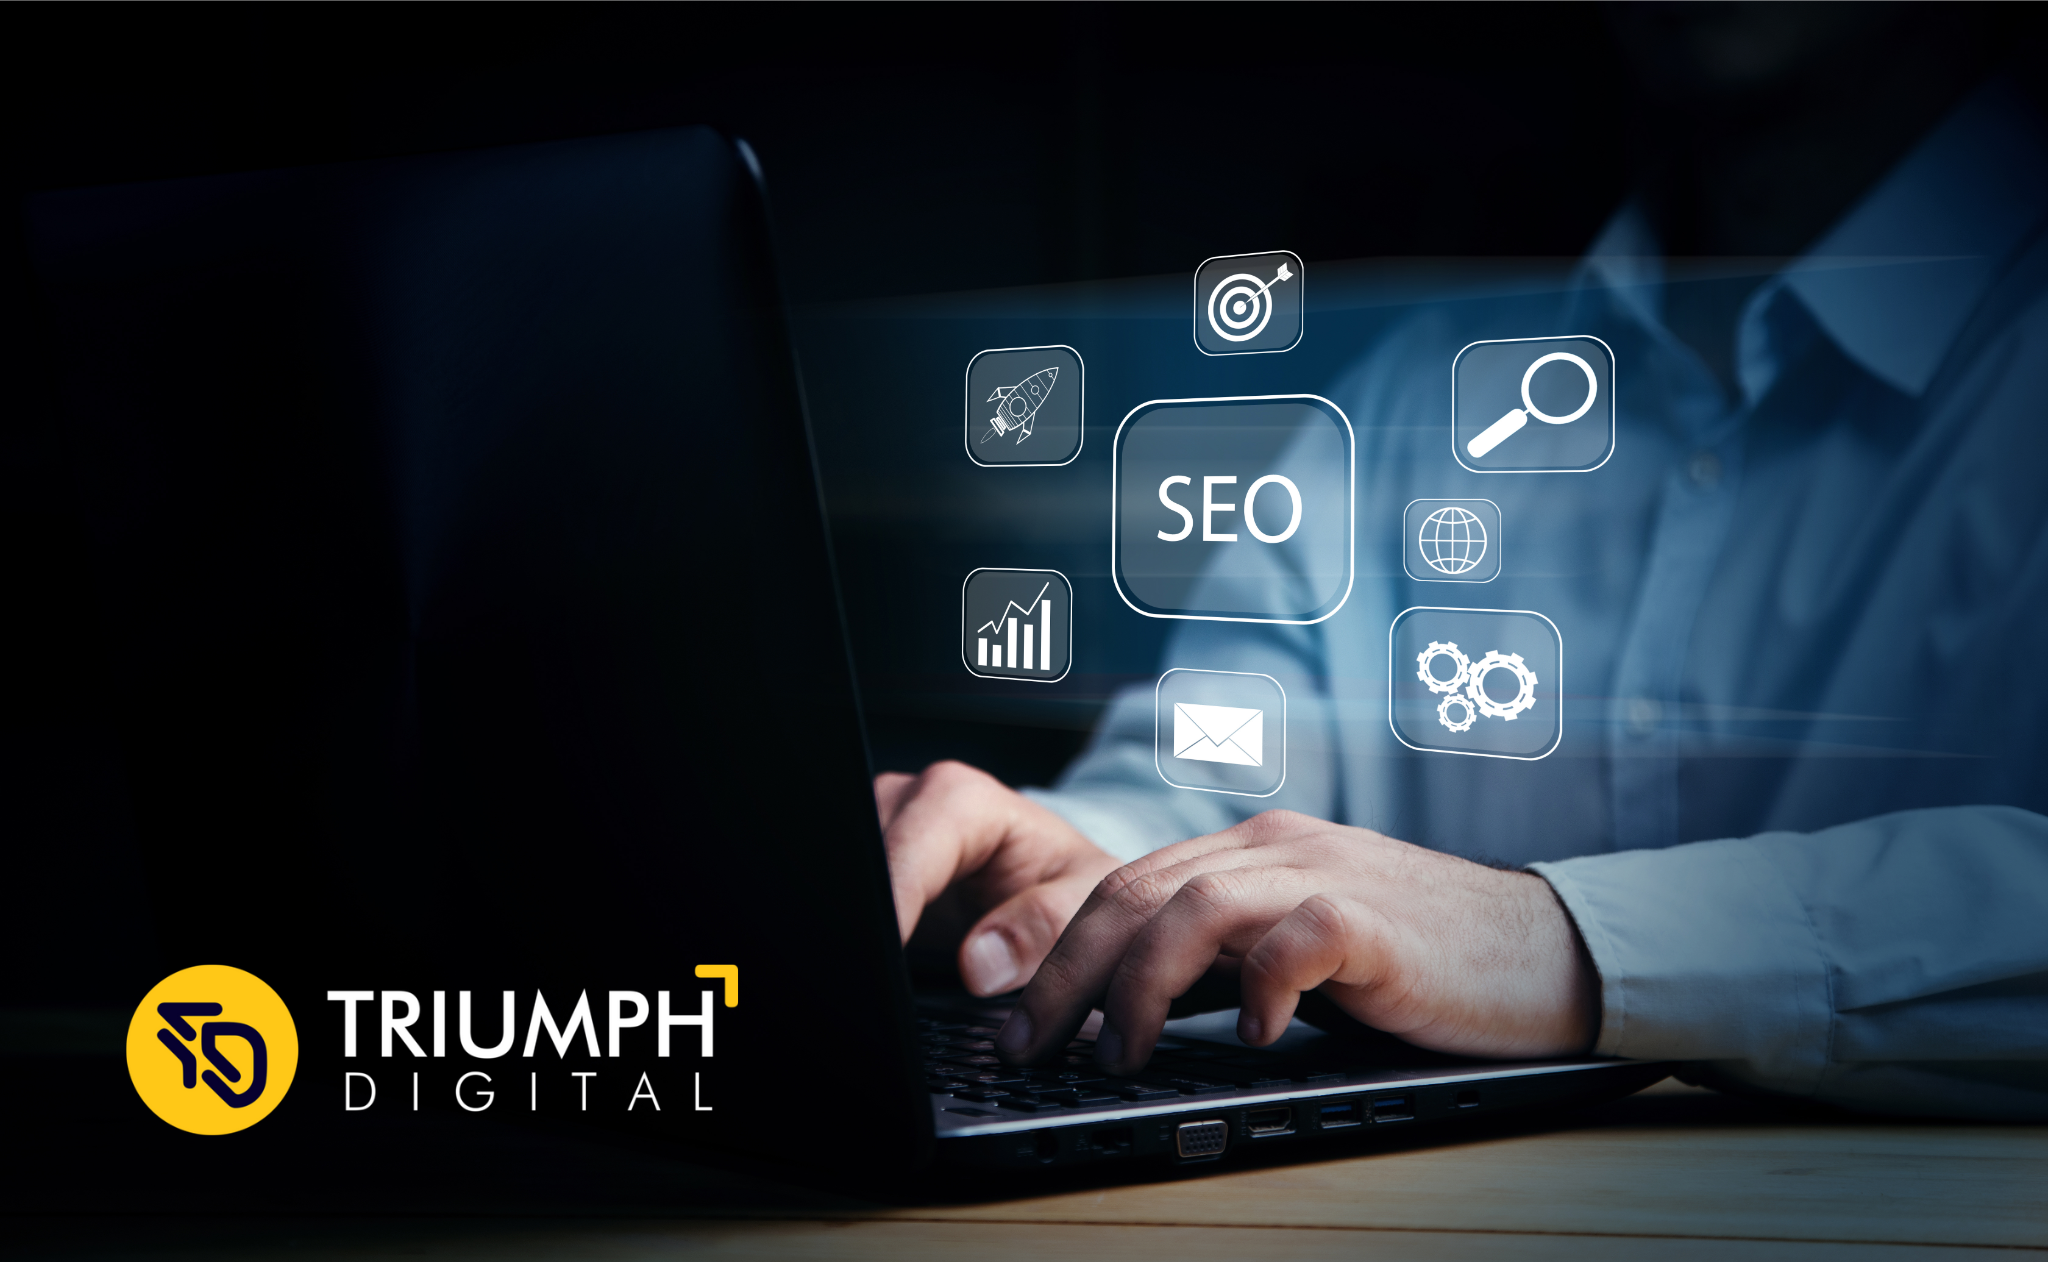 Triumph Digital’s SEO Services Propel Your Business to New Heights!